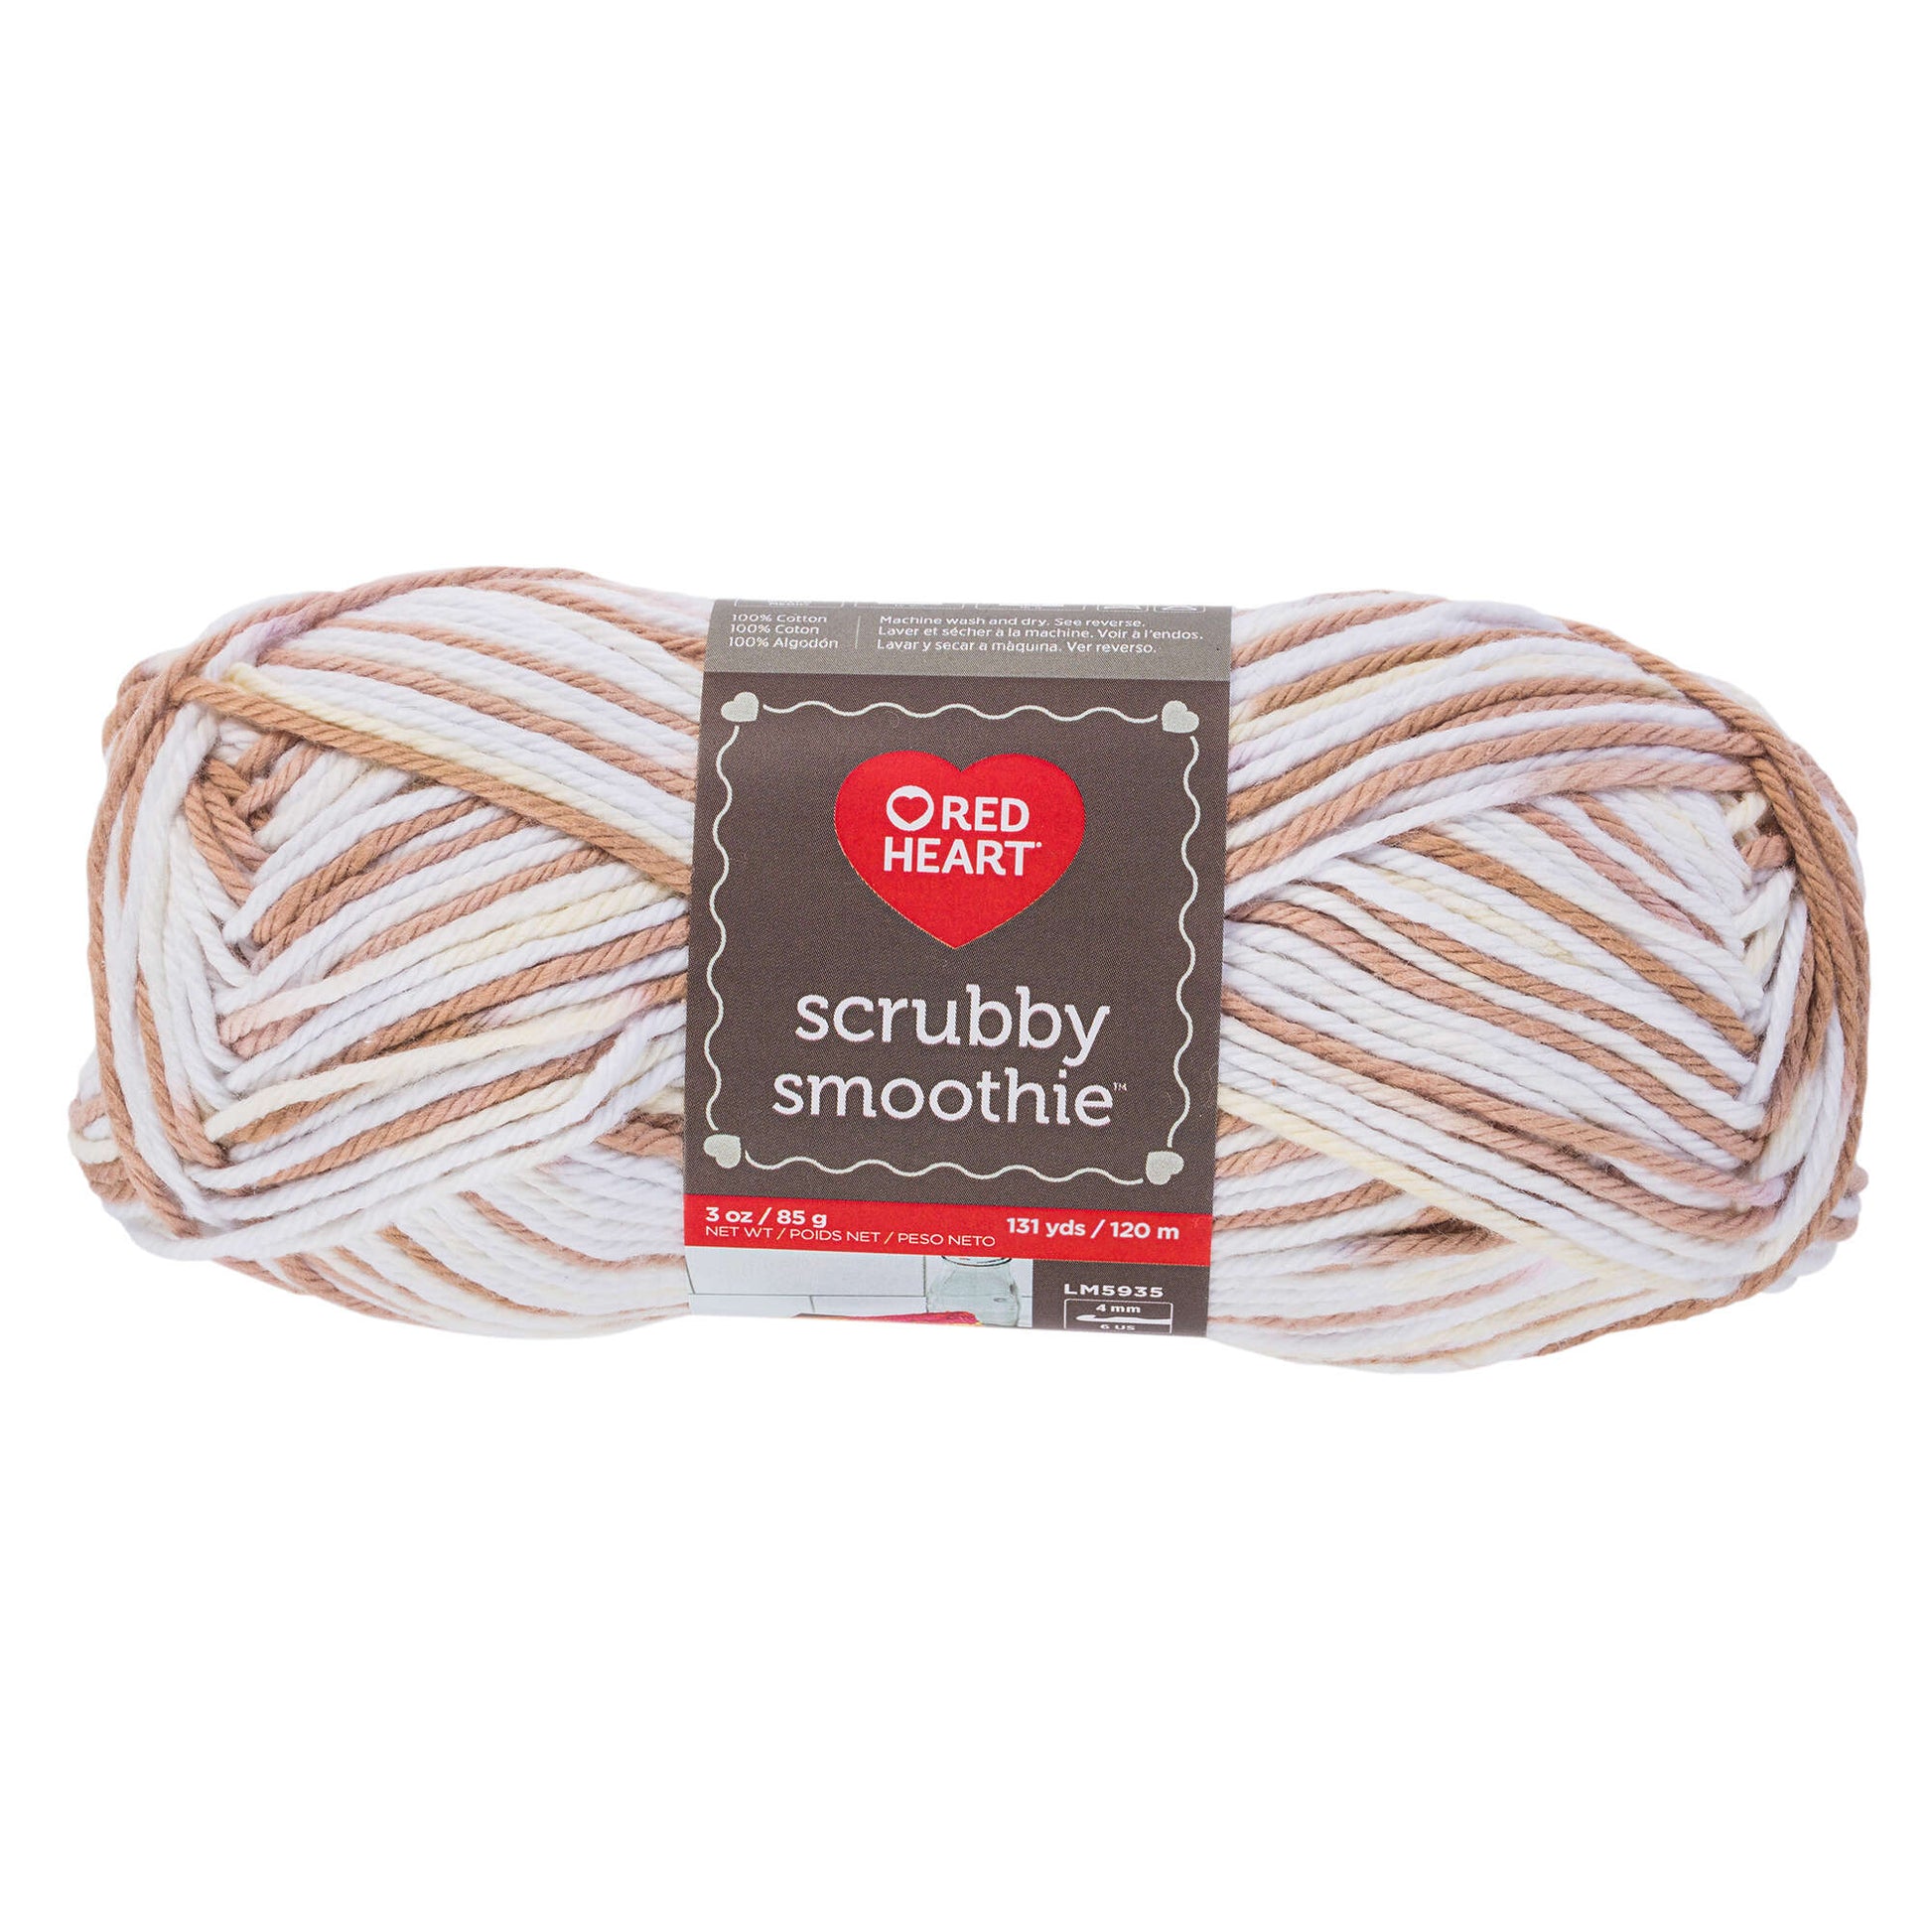 Red Heart Scrubby Smoothie Yarn - Clearance shades Oatmeal